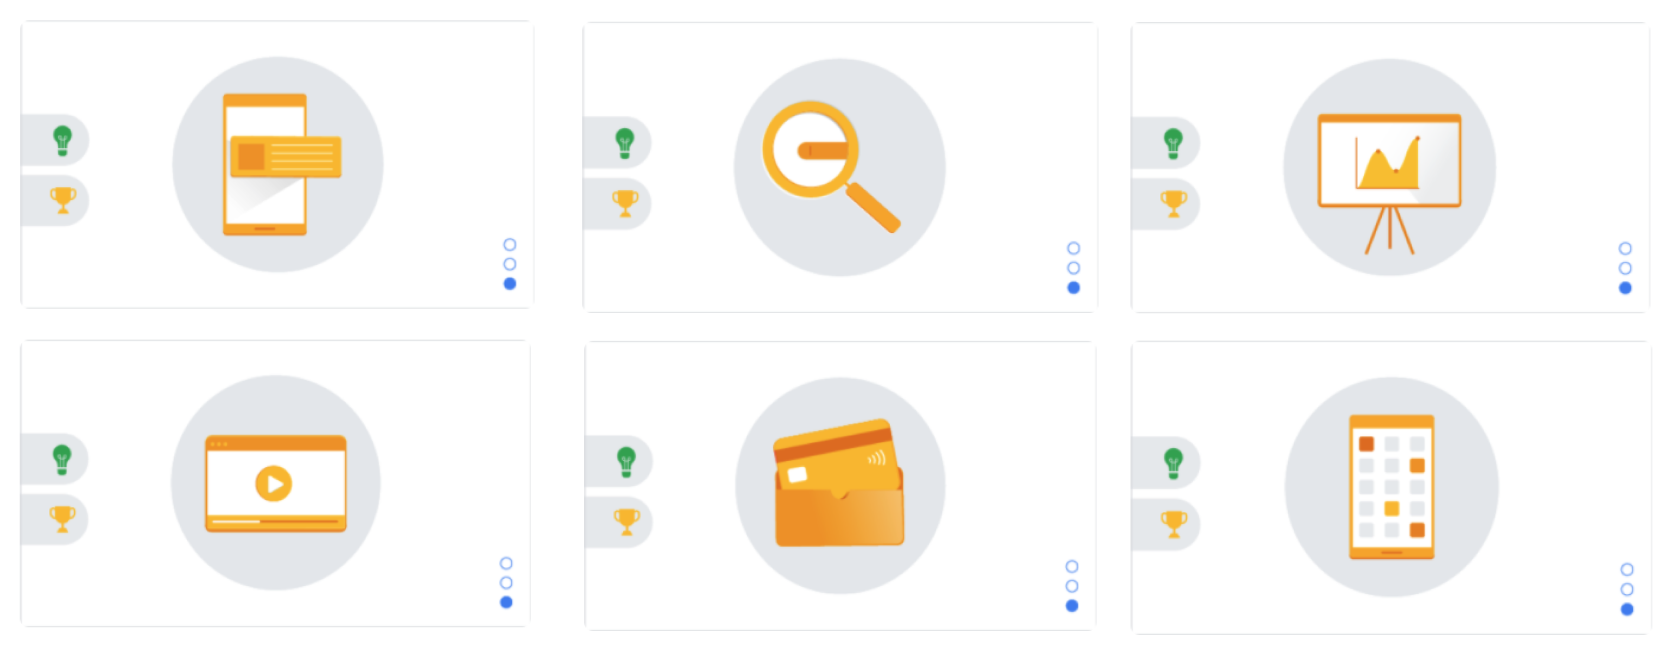 The badges for the six different Google Ad certifications